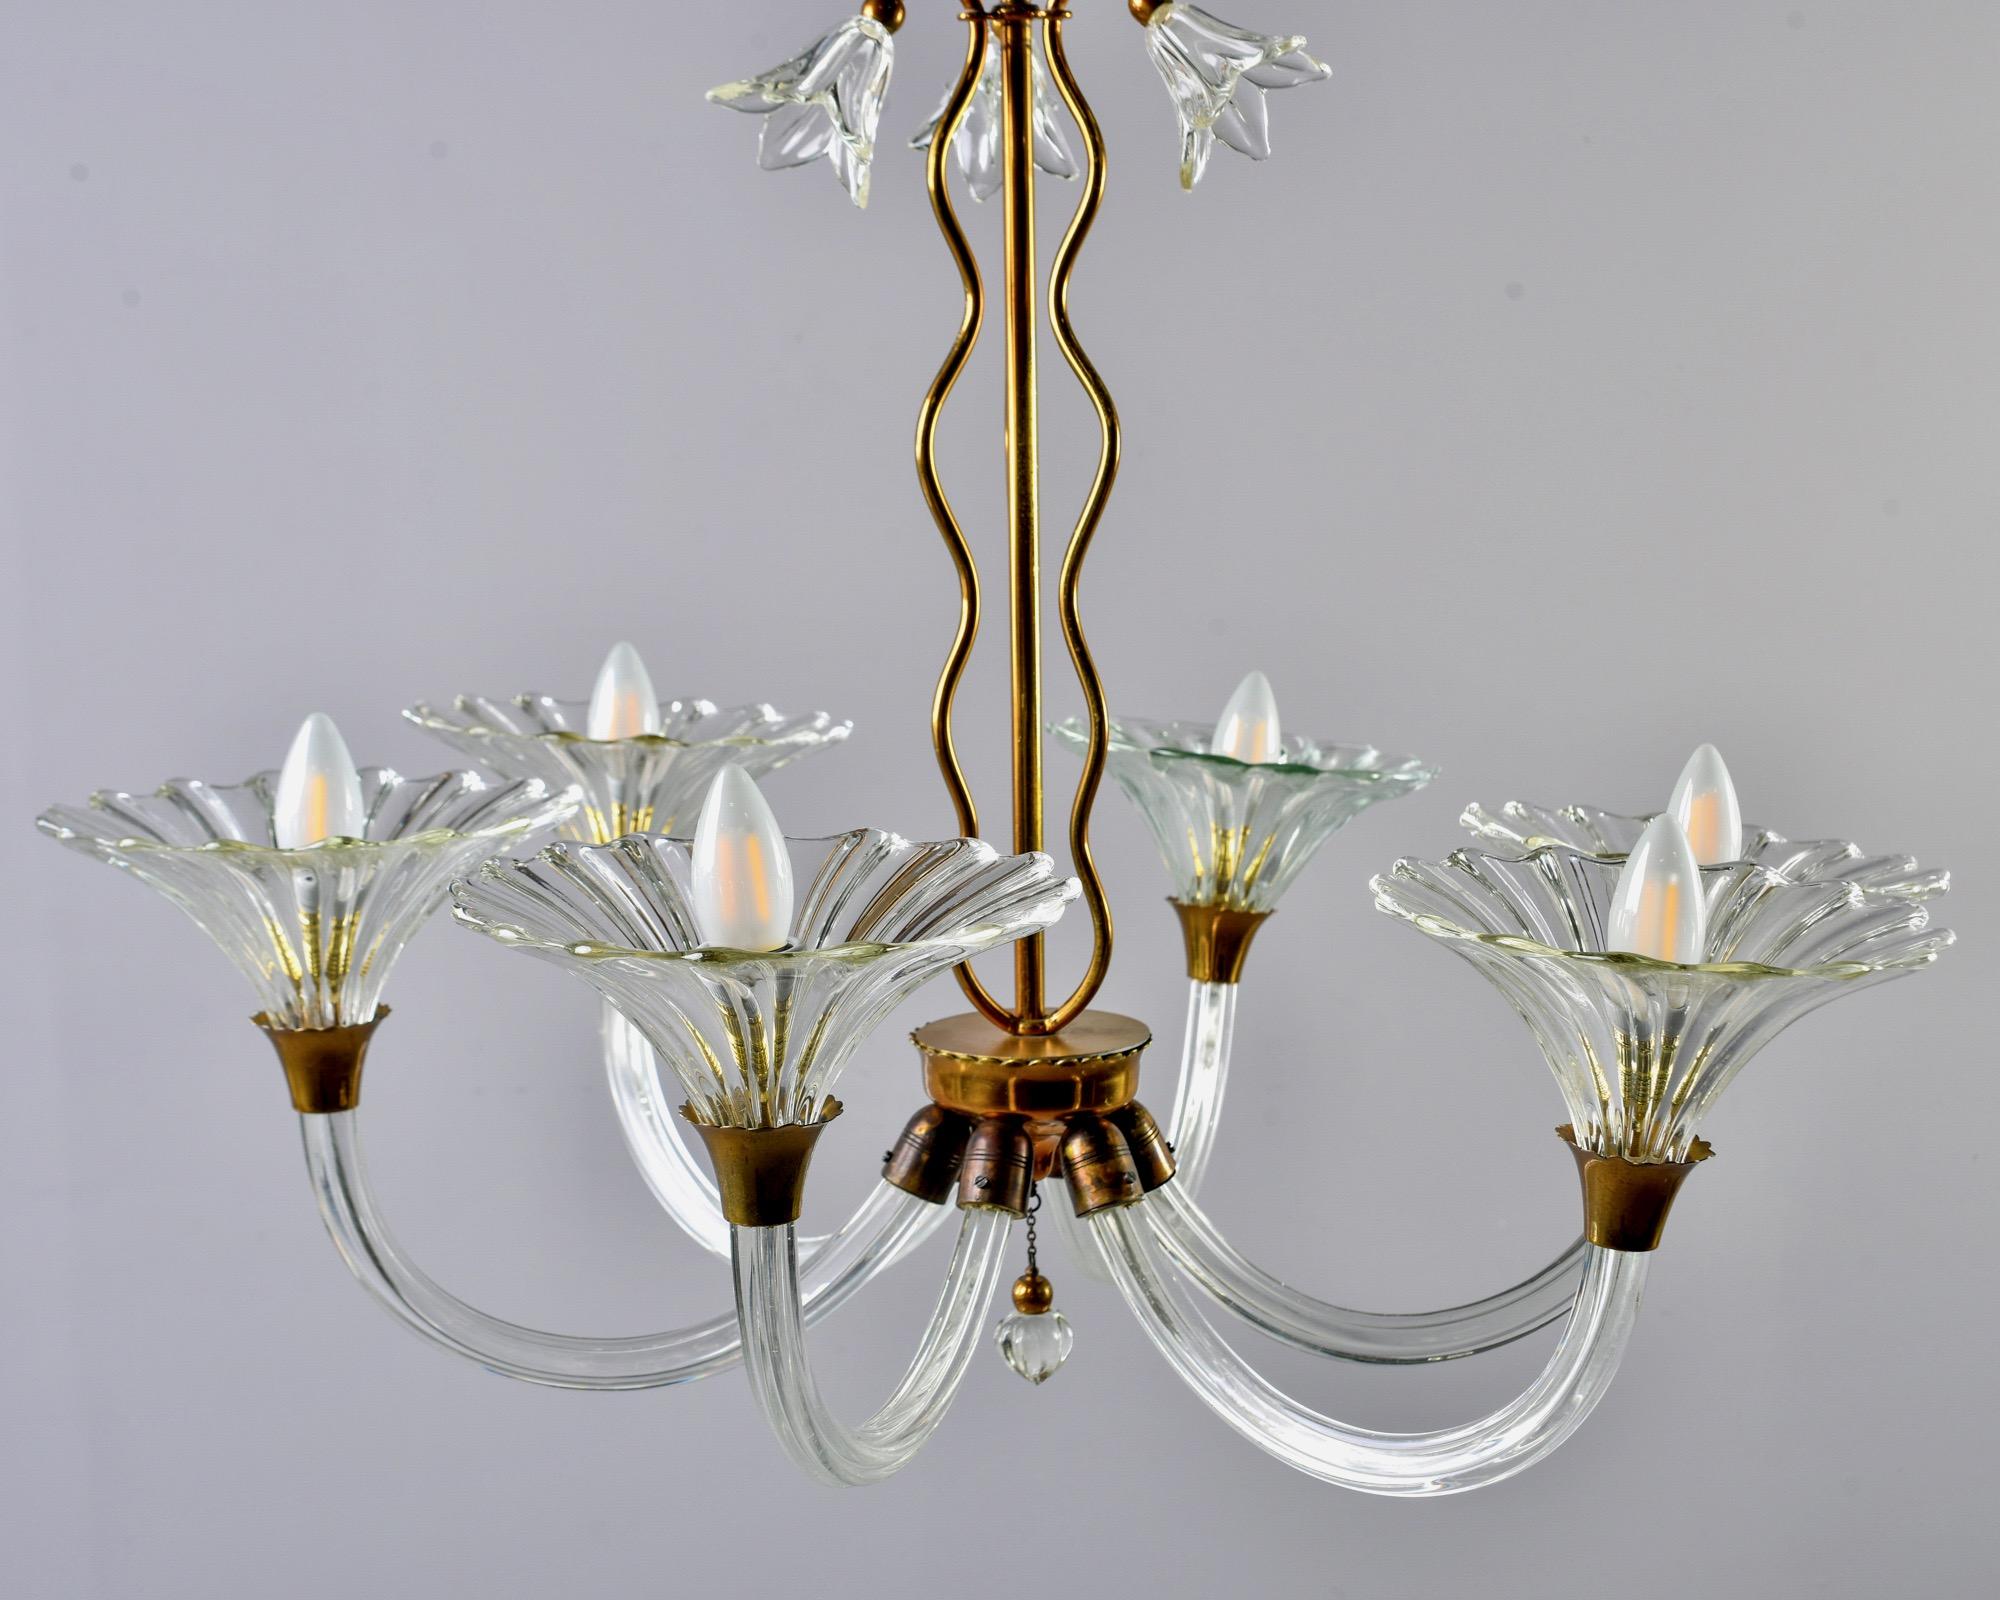 Italian Barovier and Toso Six-Arm Chandelier with Brass Fittings